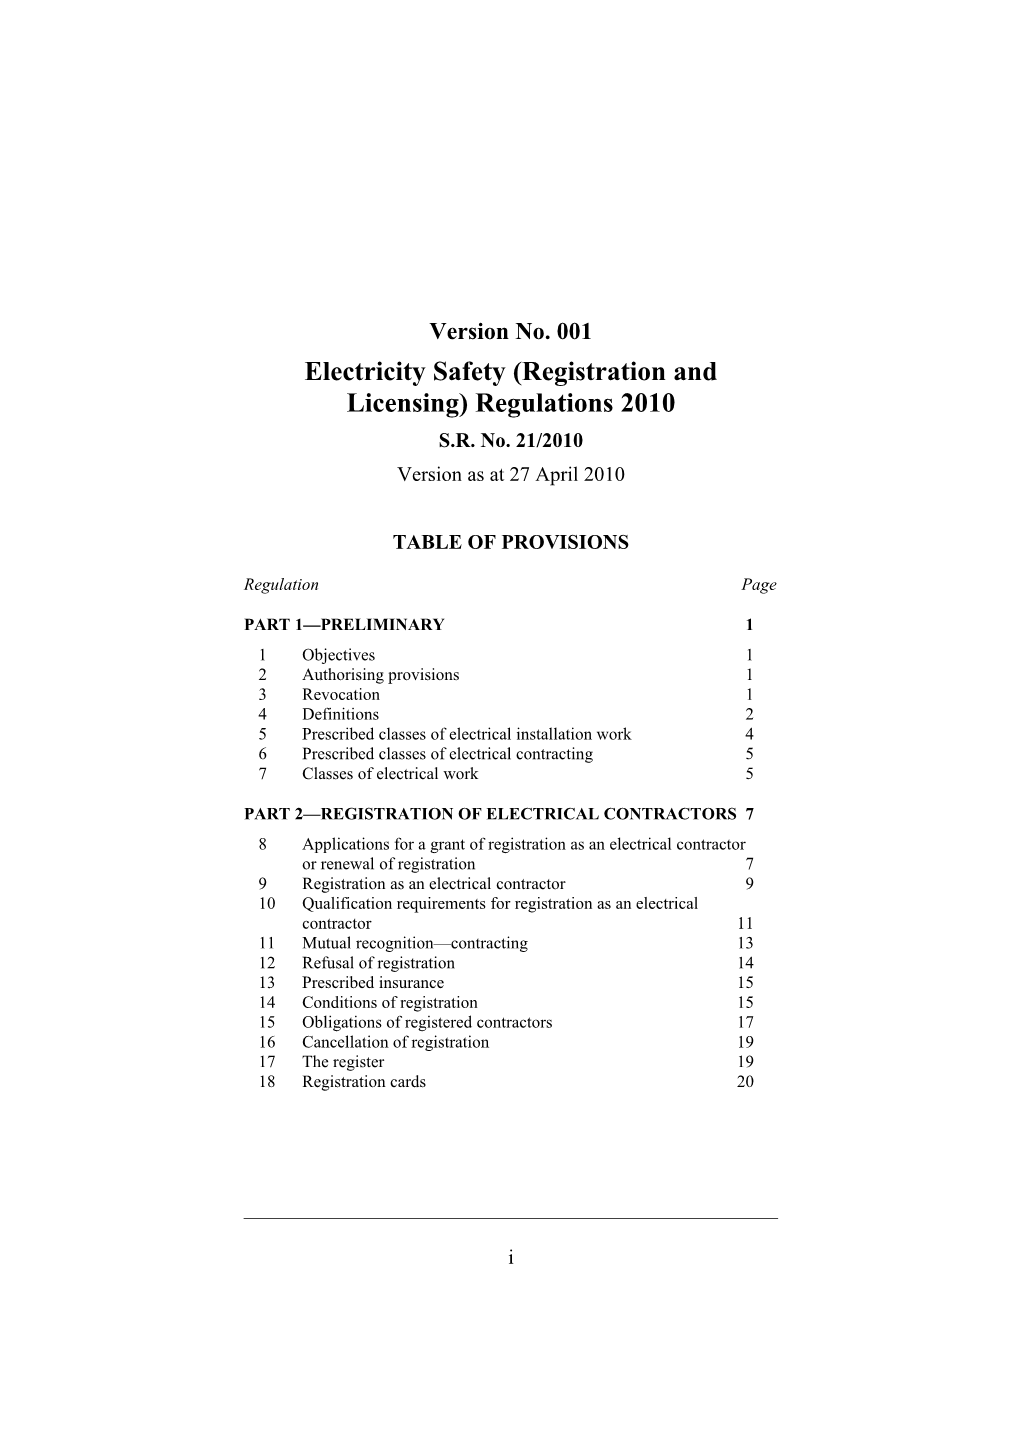 Electricity Safety (Registration and Licensing) Regulations 2010